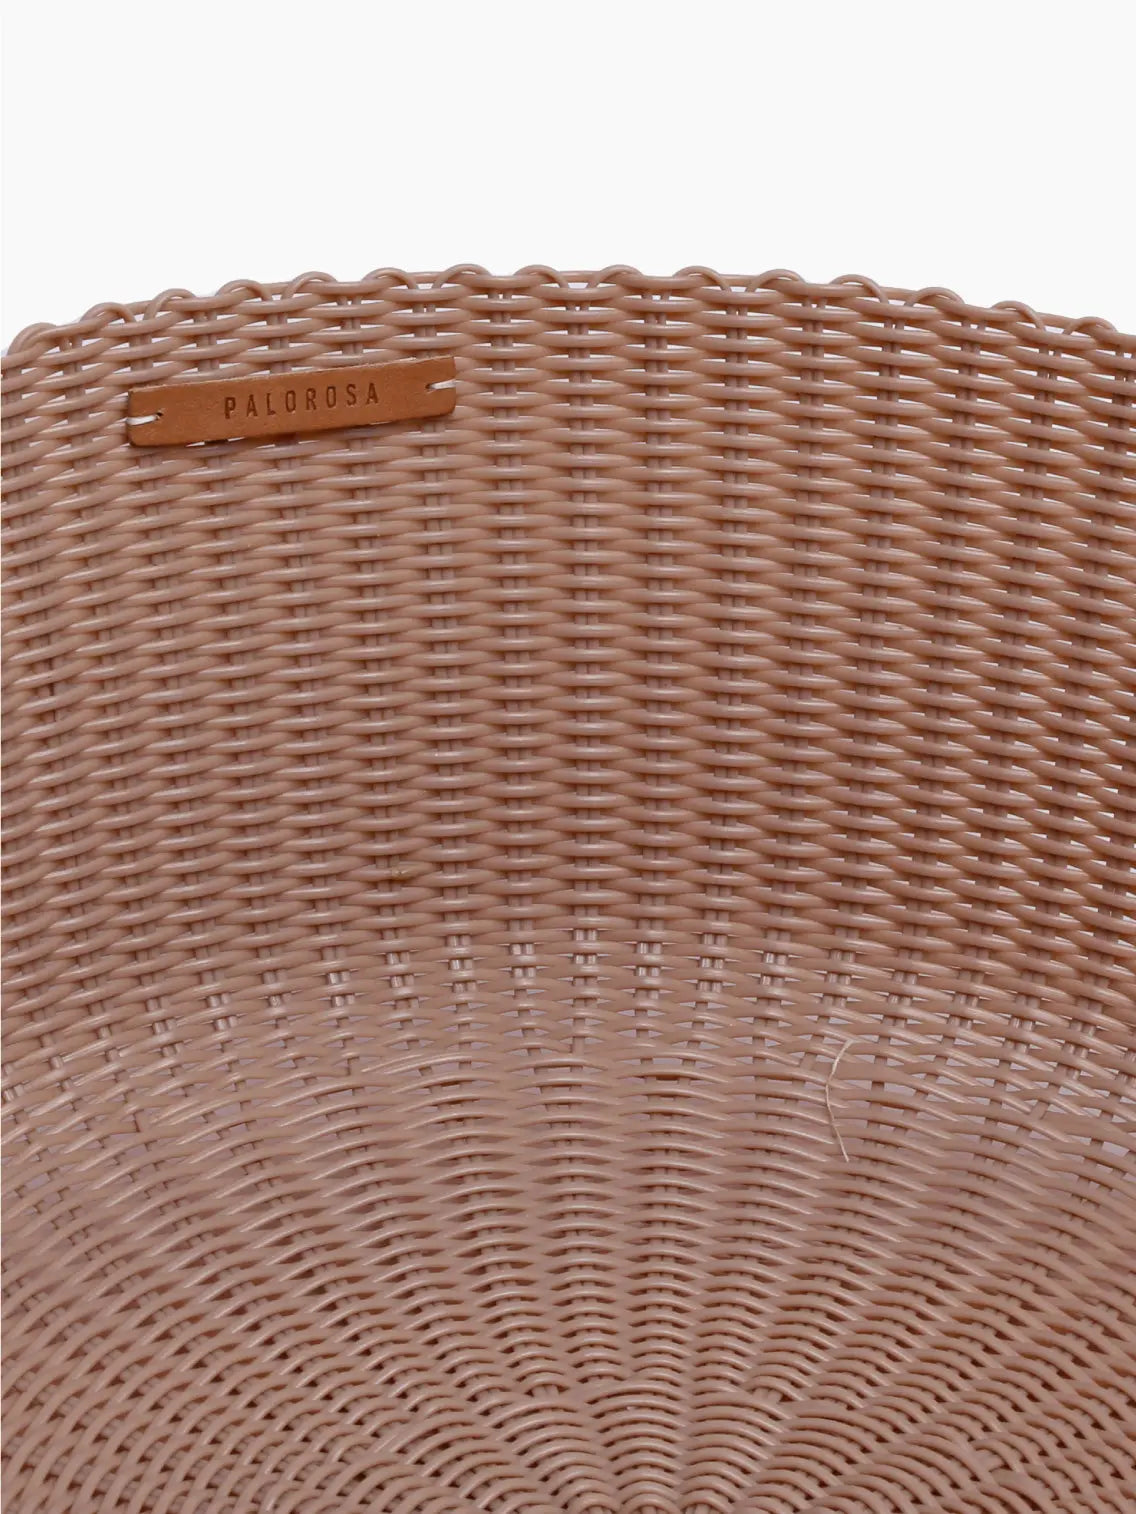 A round, shallow basket made of beige synthetic material with a woven pattern. The basket features a textured design and smooth edges, suitable for decorative or storage purposes. Available at Bassalstore in Barcelona, the Palorosa Fruit Basket Large Powder is placed against a plain white background.